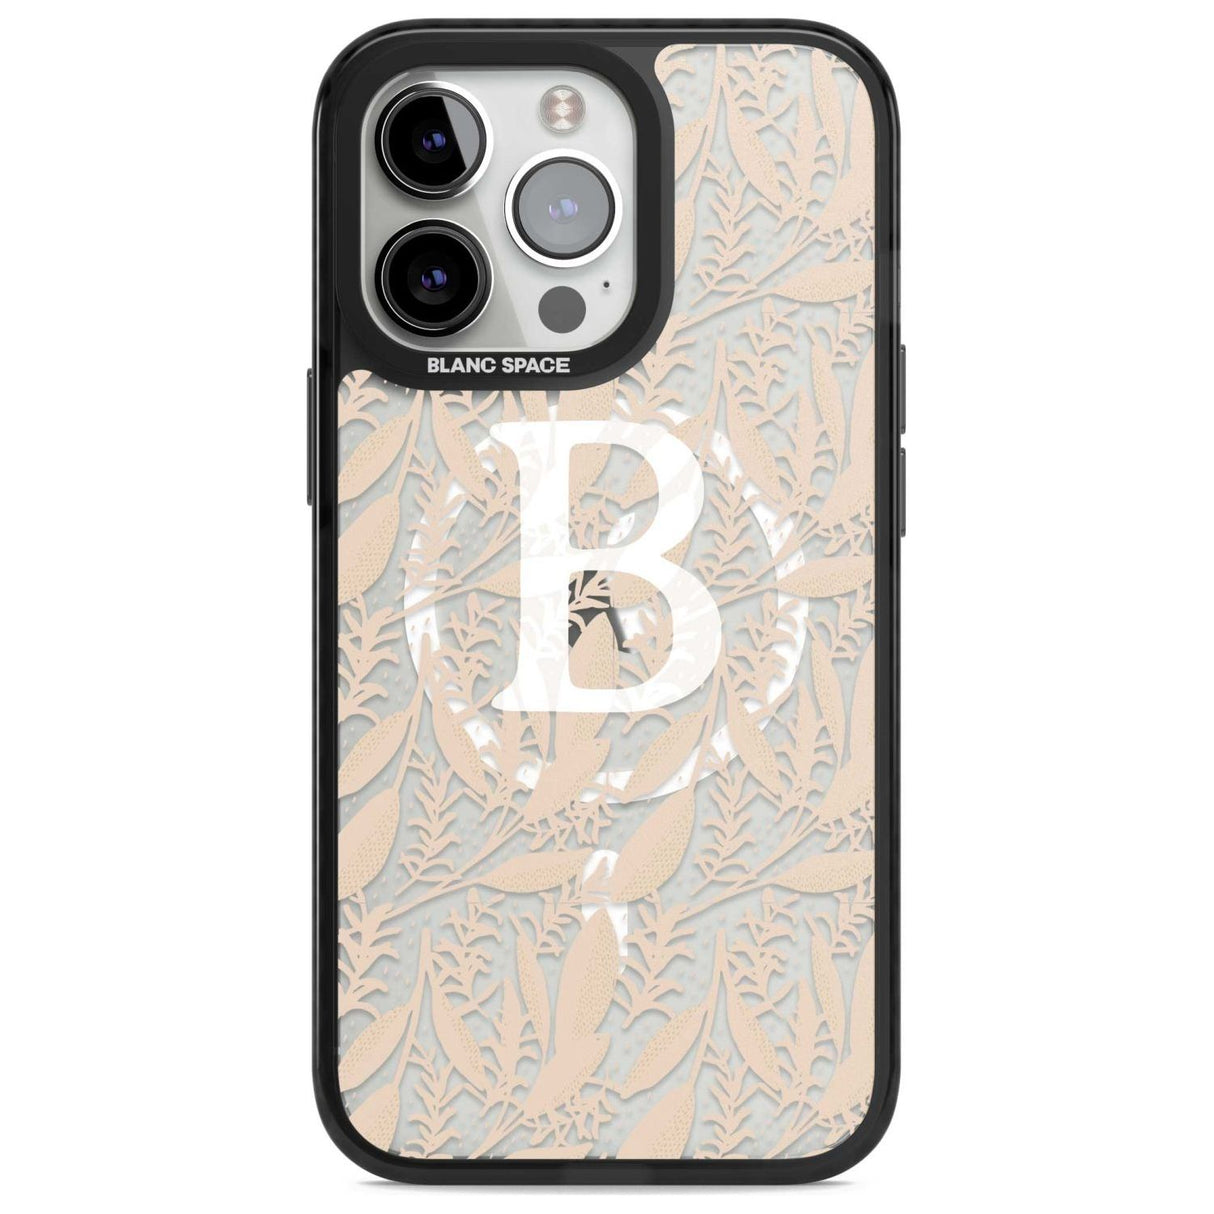 Personalised Subtle Monogram Abstract Floral Custom Phone Case iPhone 15 Pro Max / Magsafe Black Impact Case,iPhone 15 Pro / Magsafe Black Impact Case,iPhone 14 Pro Max / Magsafe Black Impact Case,iPhone 14 Pro / Magsafe Black Impact Case,iPhone 13 Pro / Magsafe Black Impact Case Blanc Space